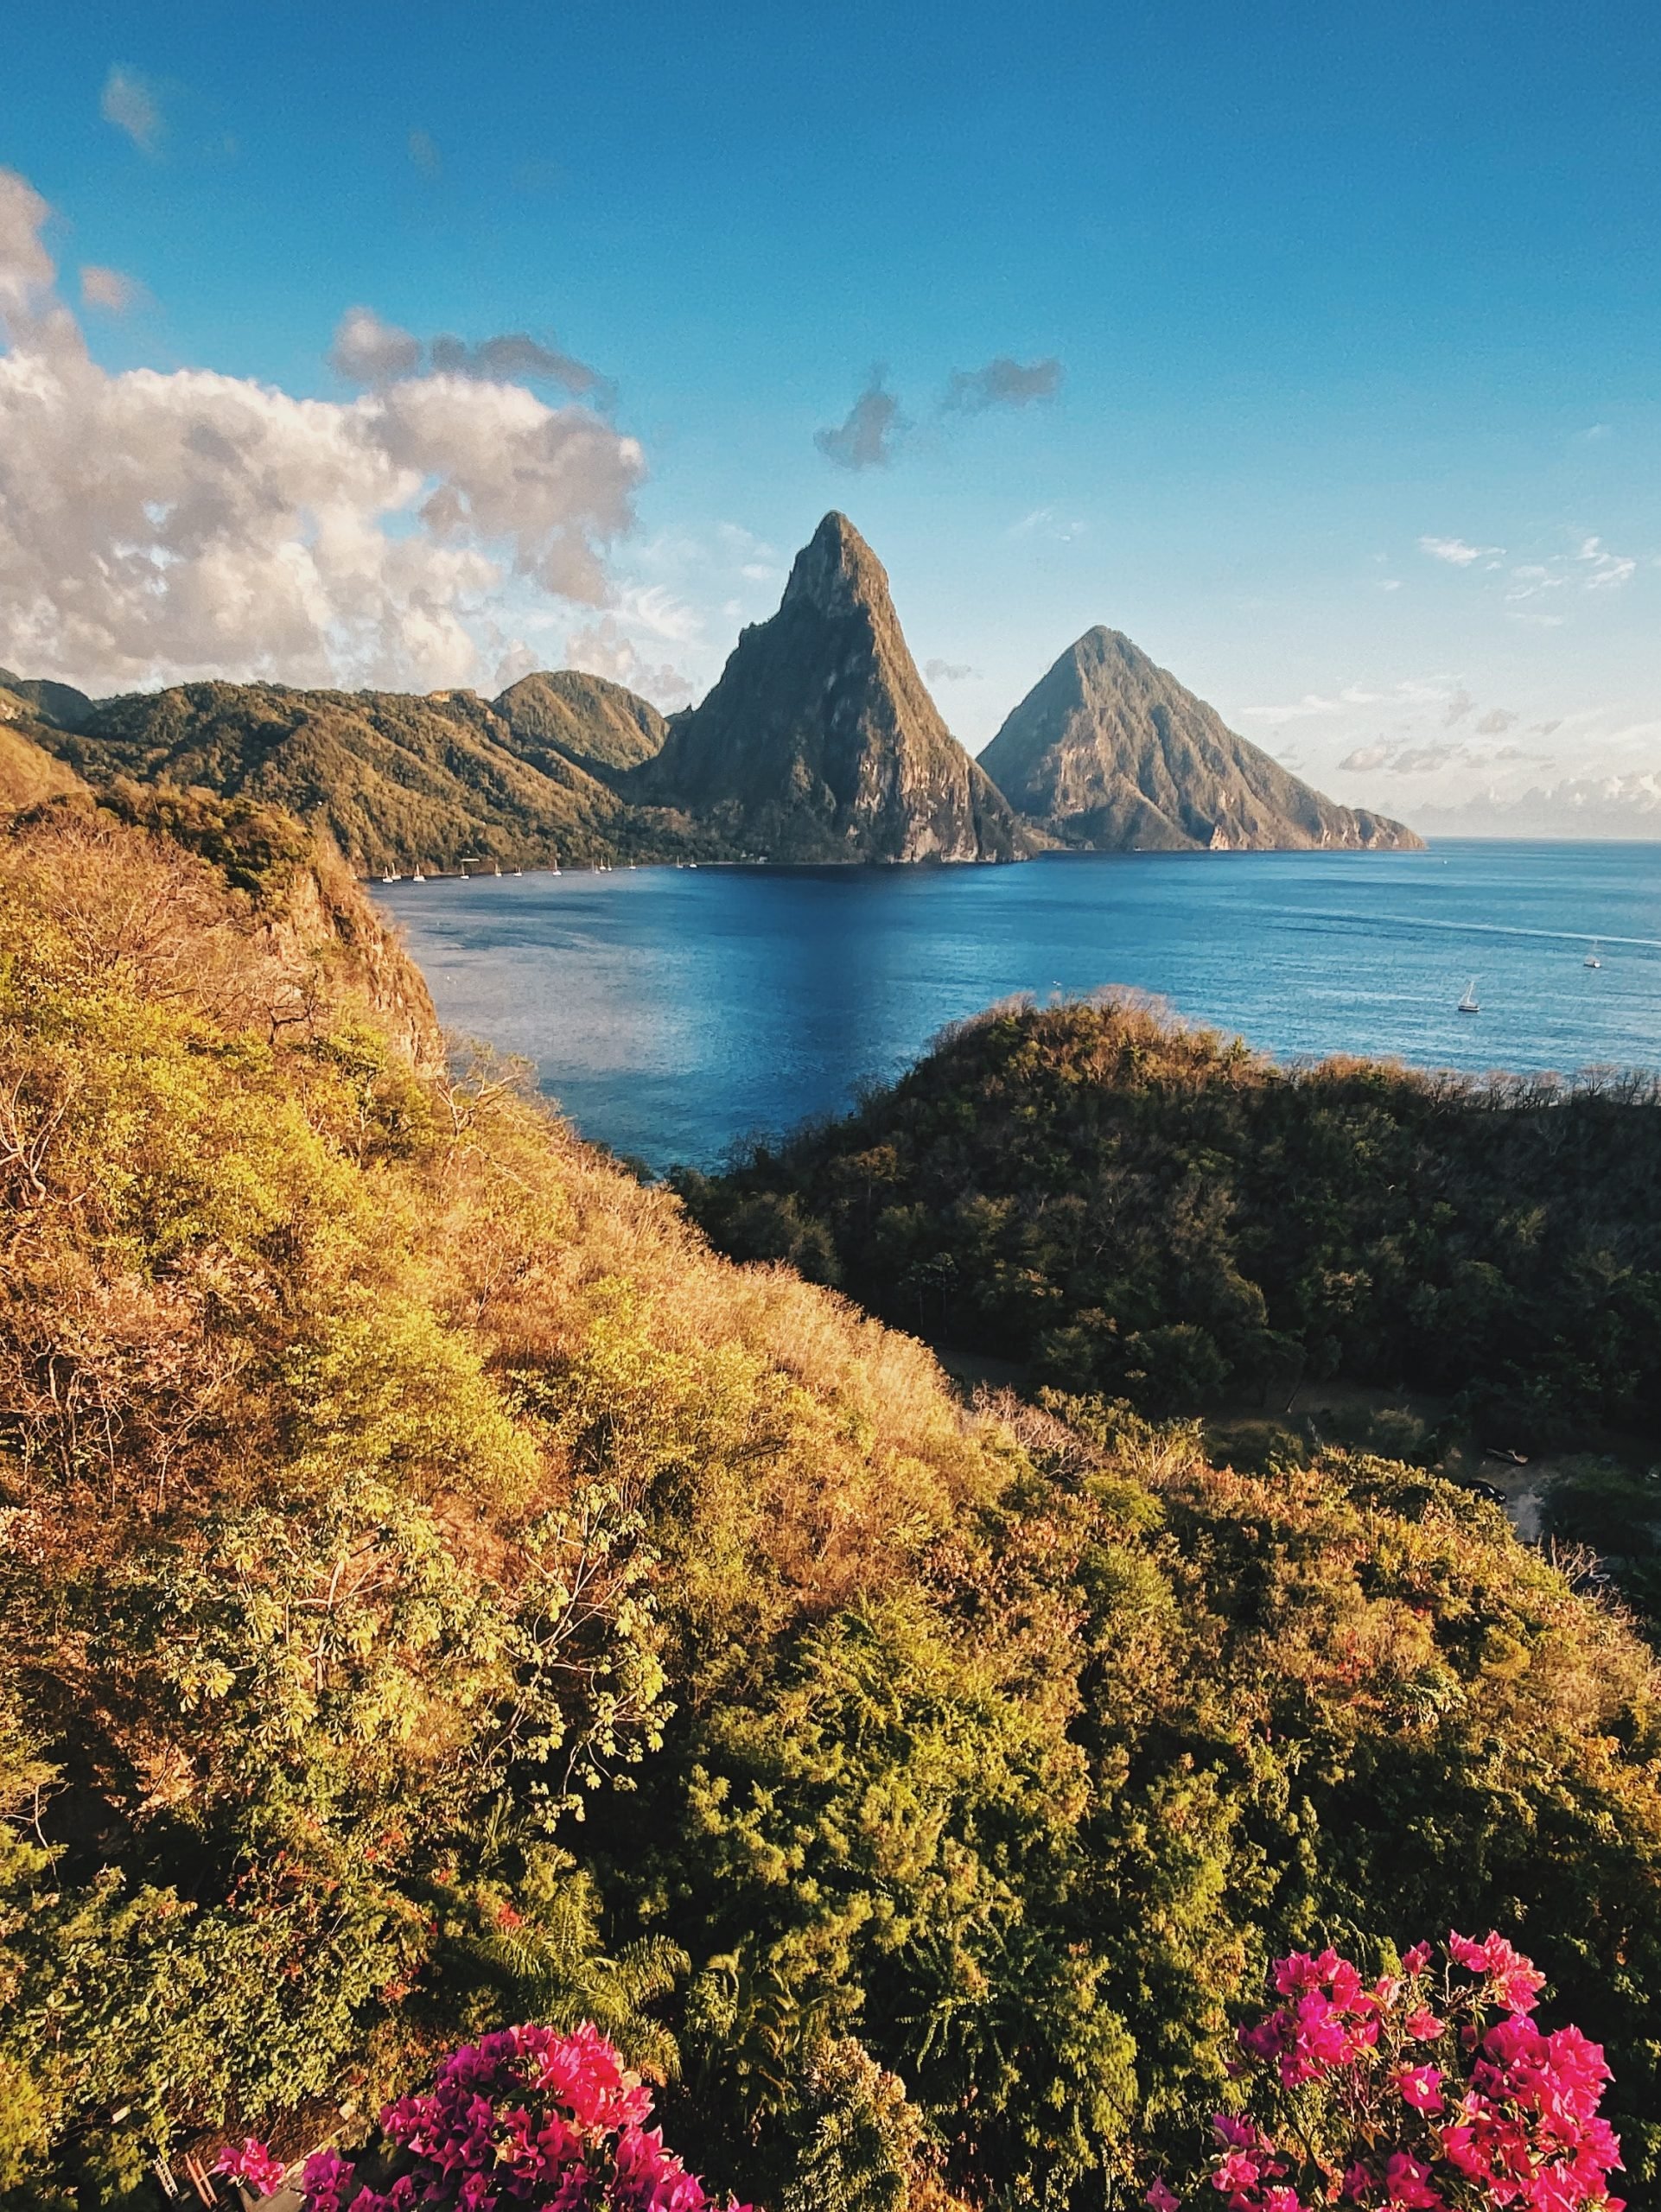 Saint Lucia packing list, what to wear in Saint Lucia, what to pack for Saint Lucia